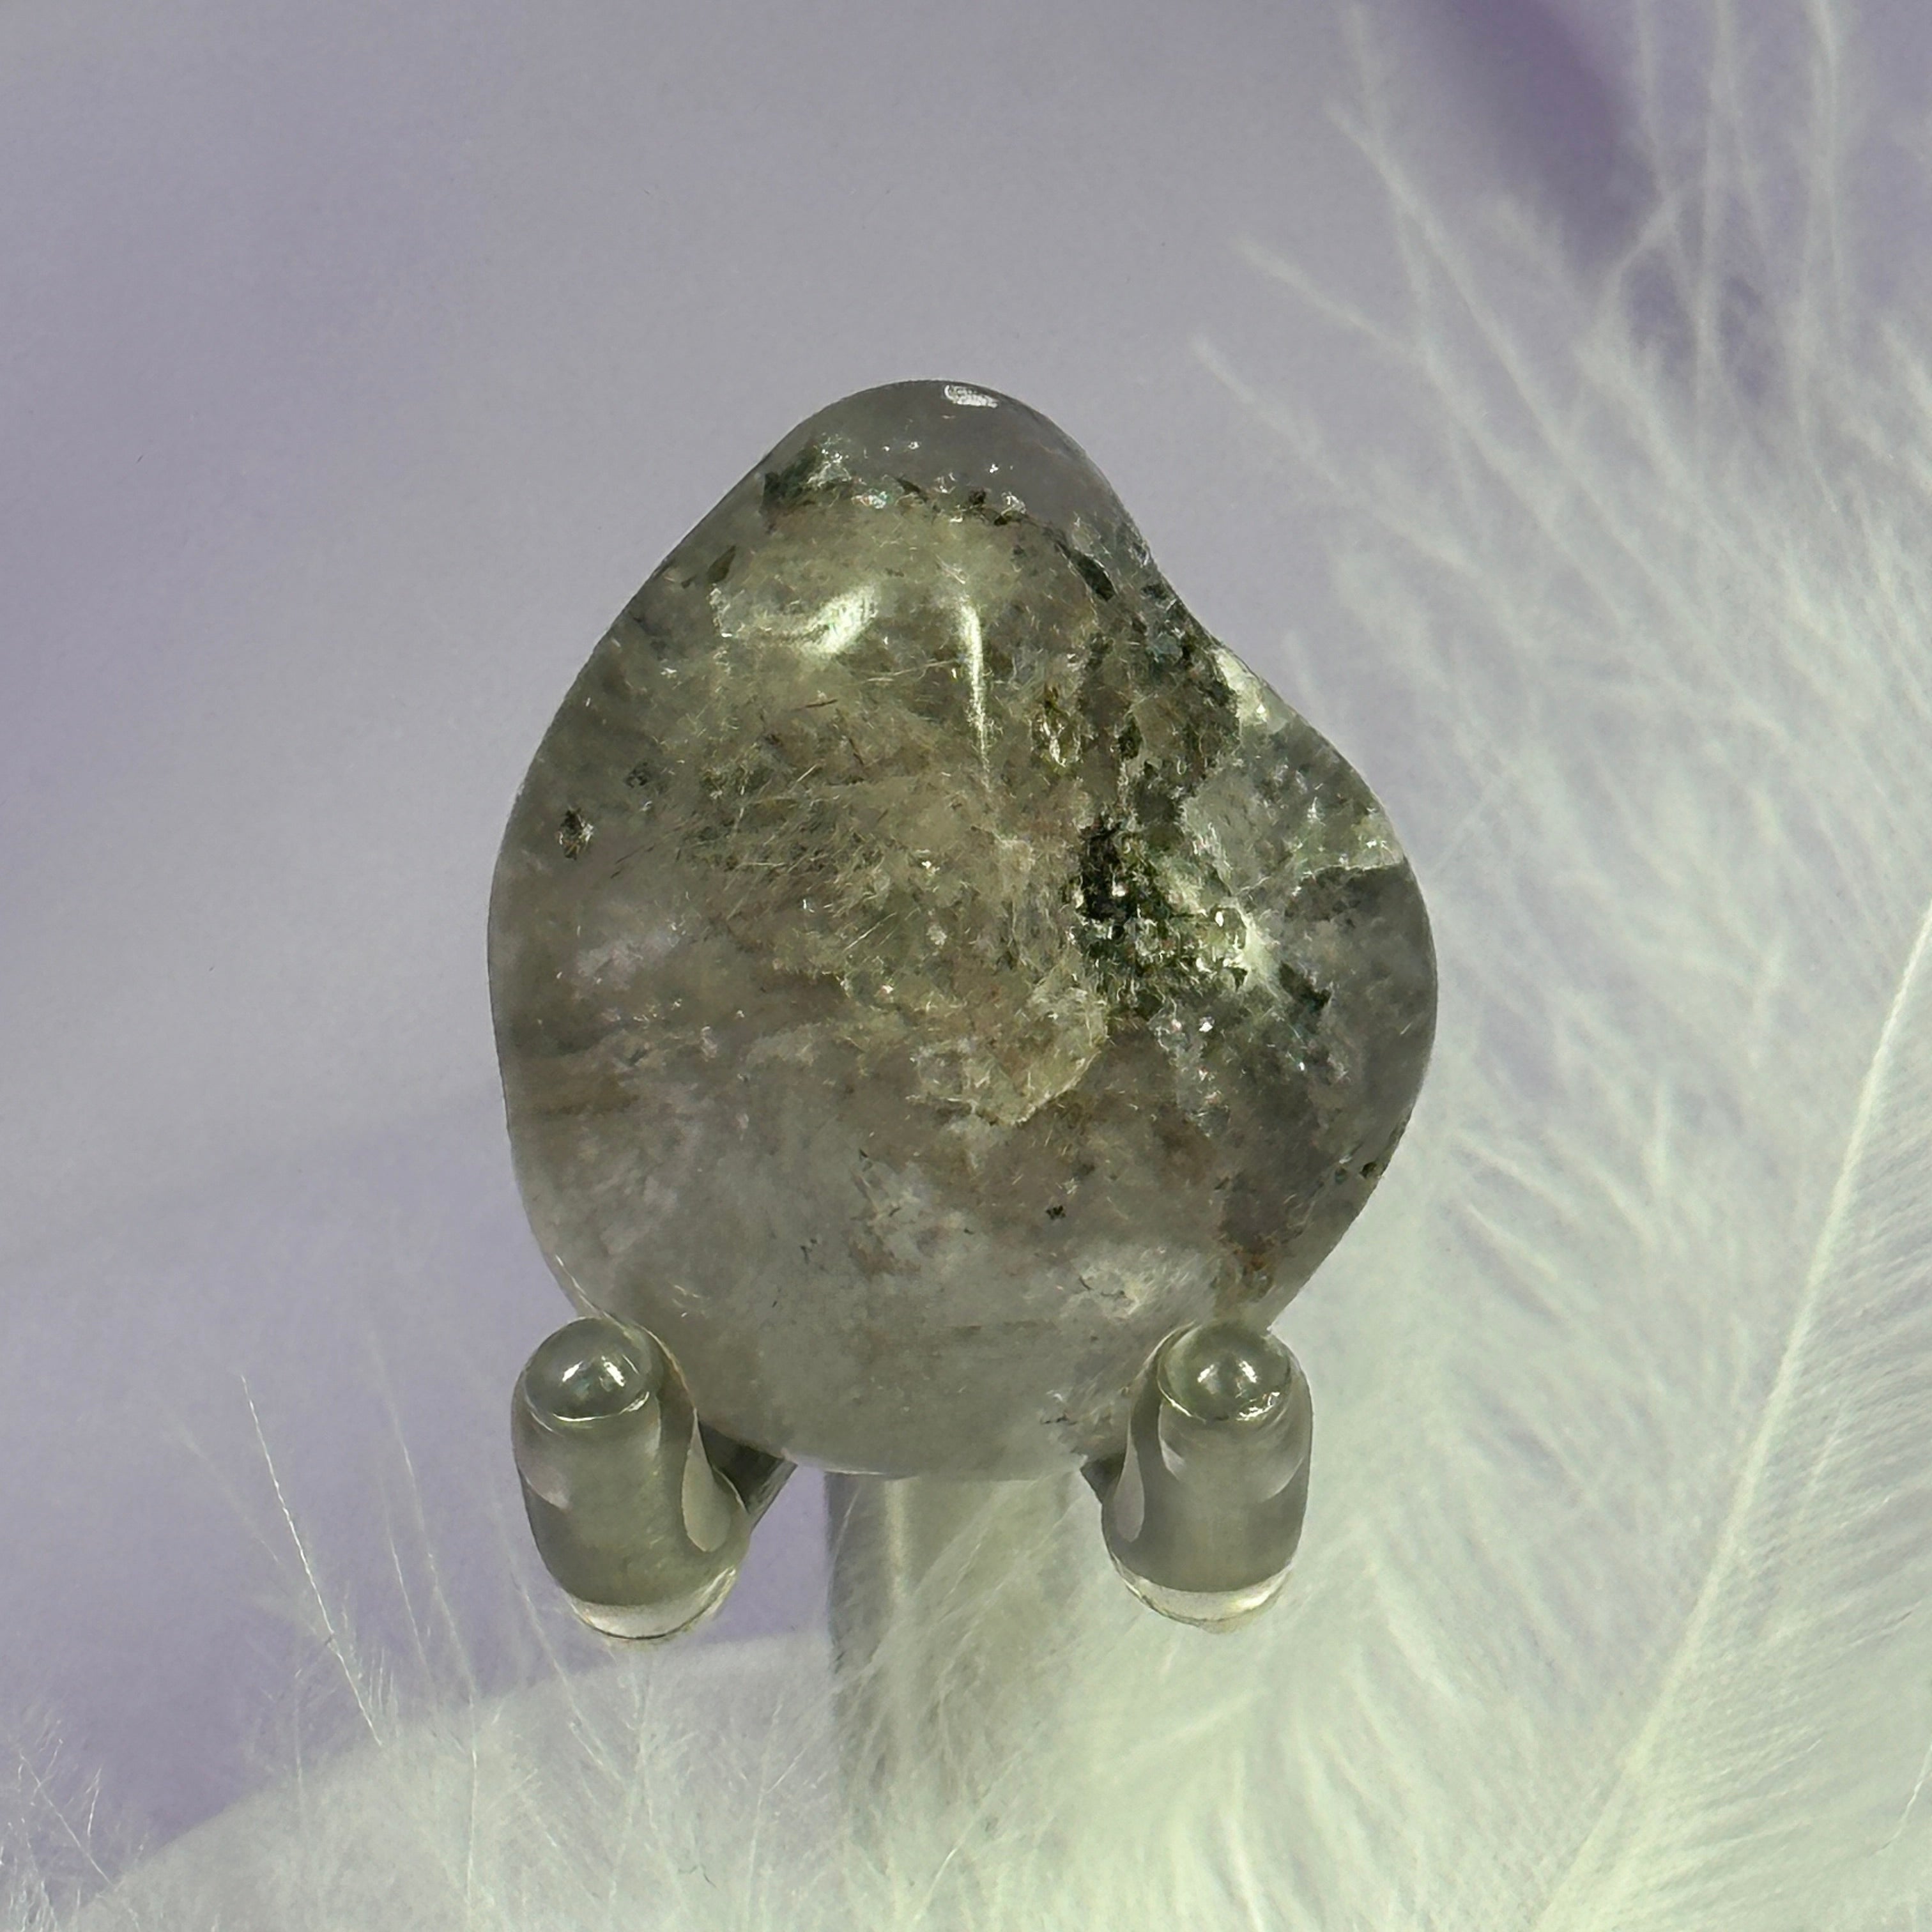 Magdalena Stone, Witches Finger crystal tumble stone 10.3g SN54031